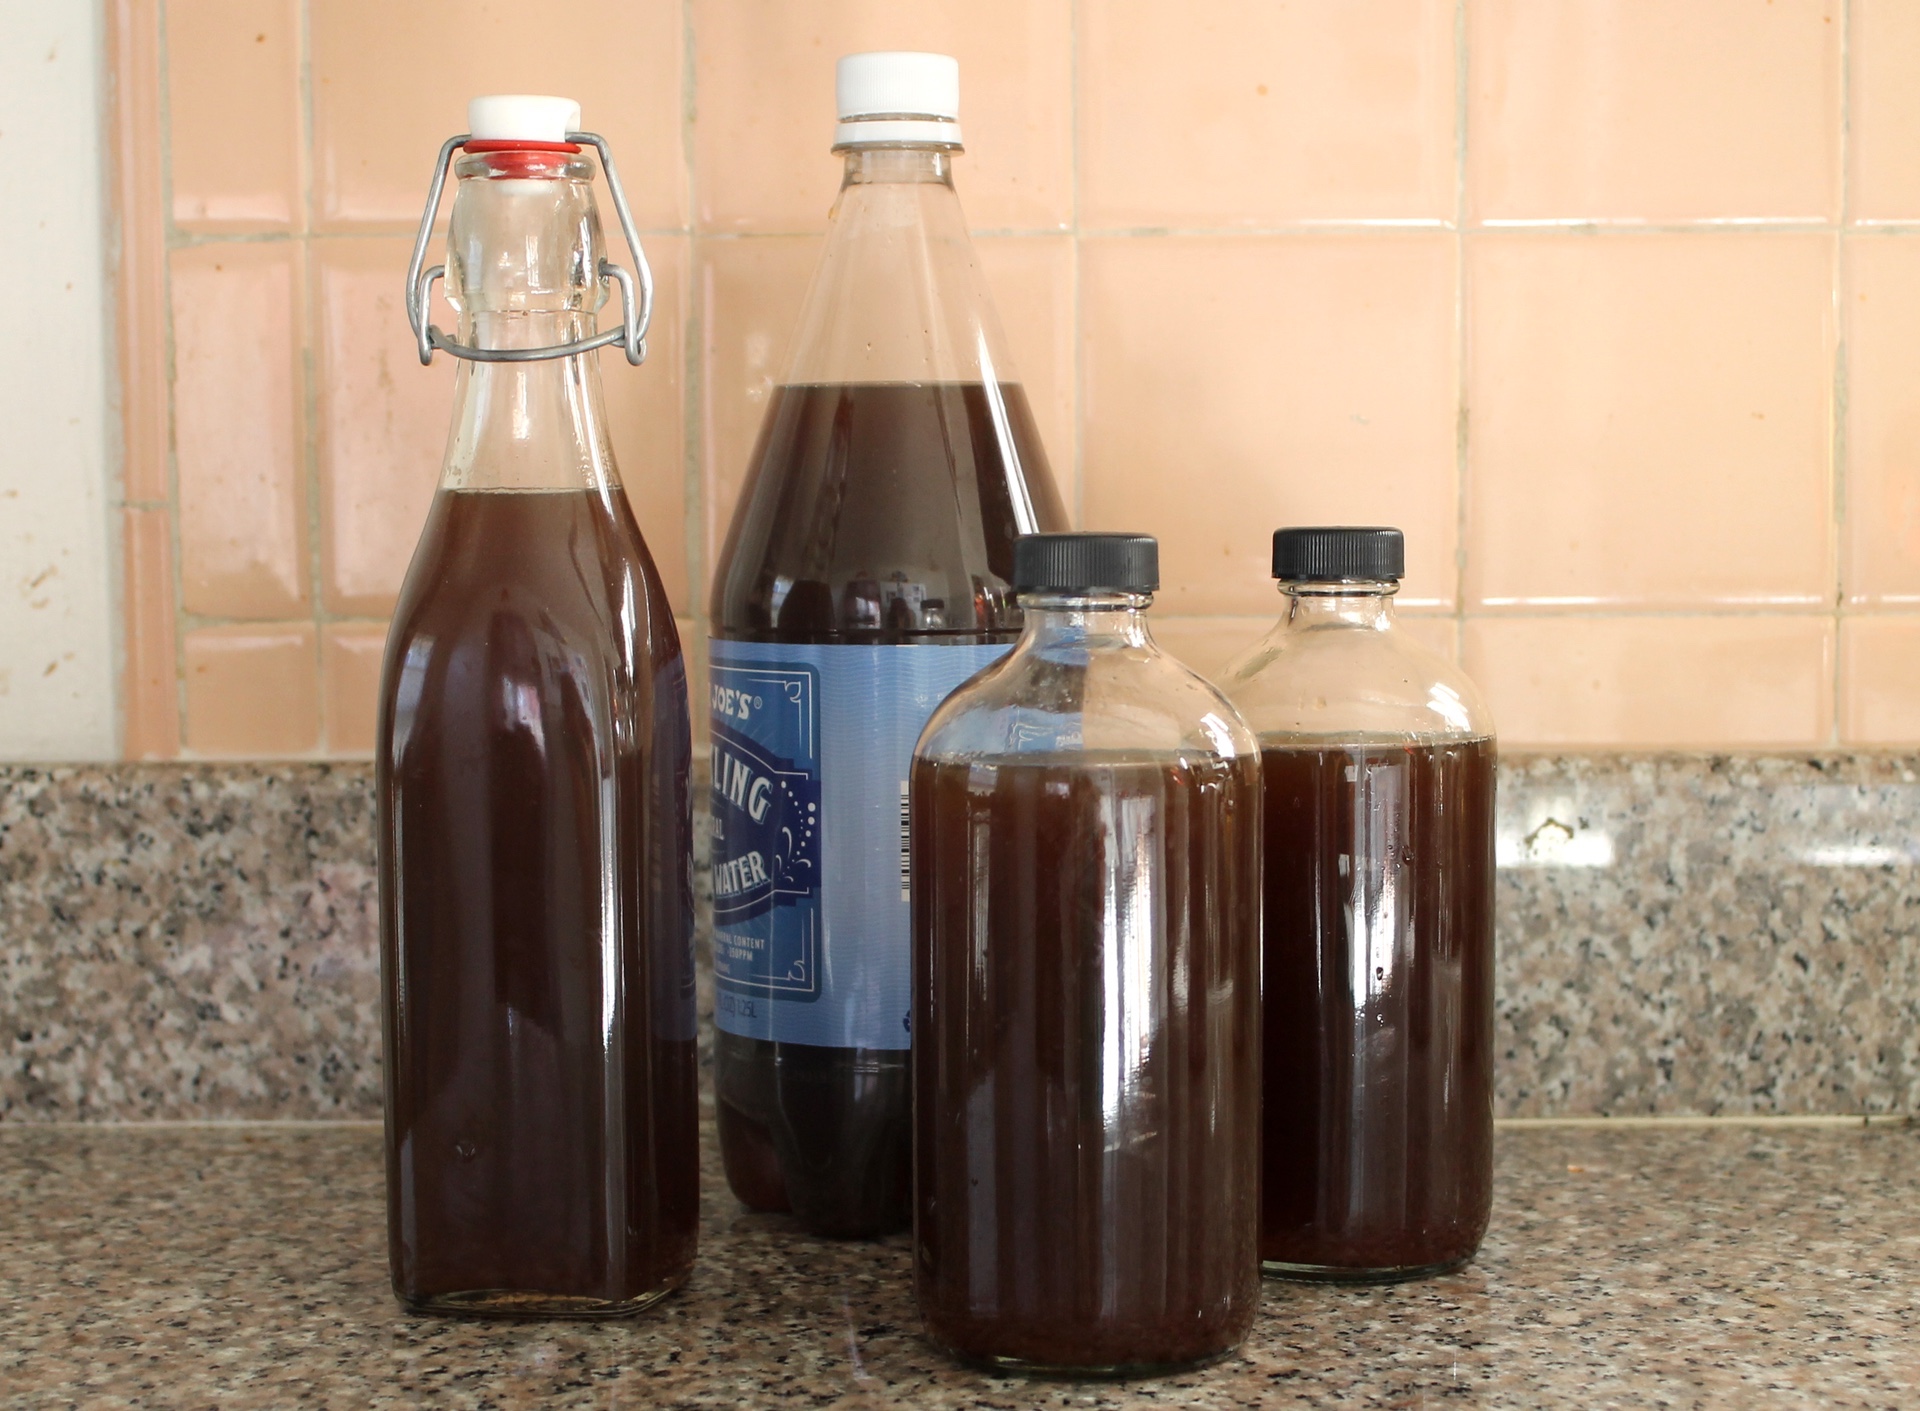 I always use at least one plastic bottle when making homemade soda — it makes it easy to monitor carbonation.